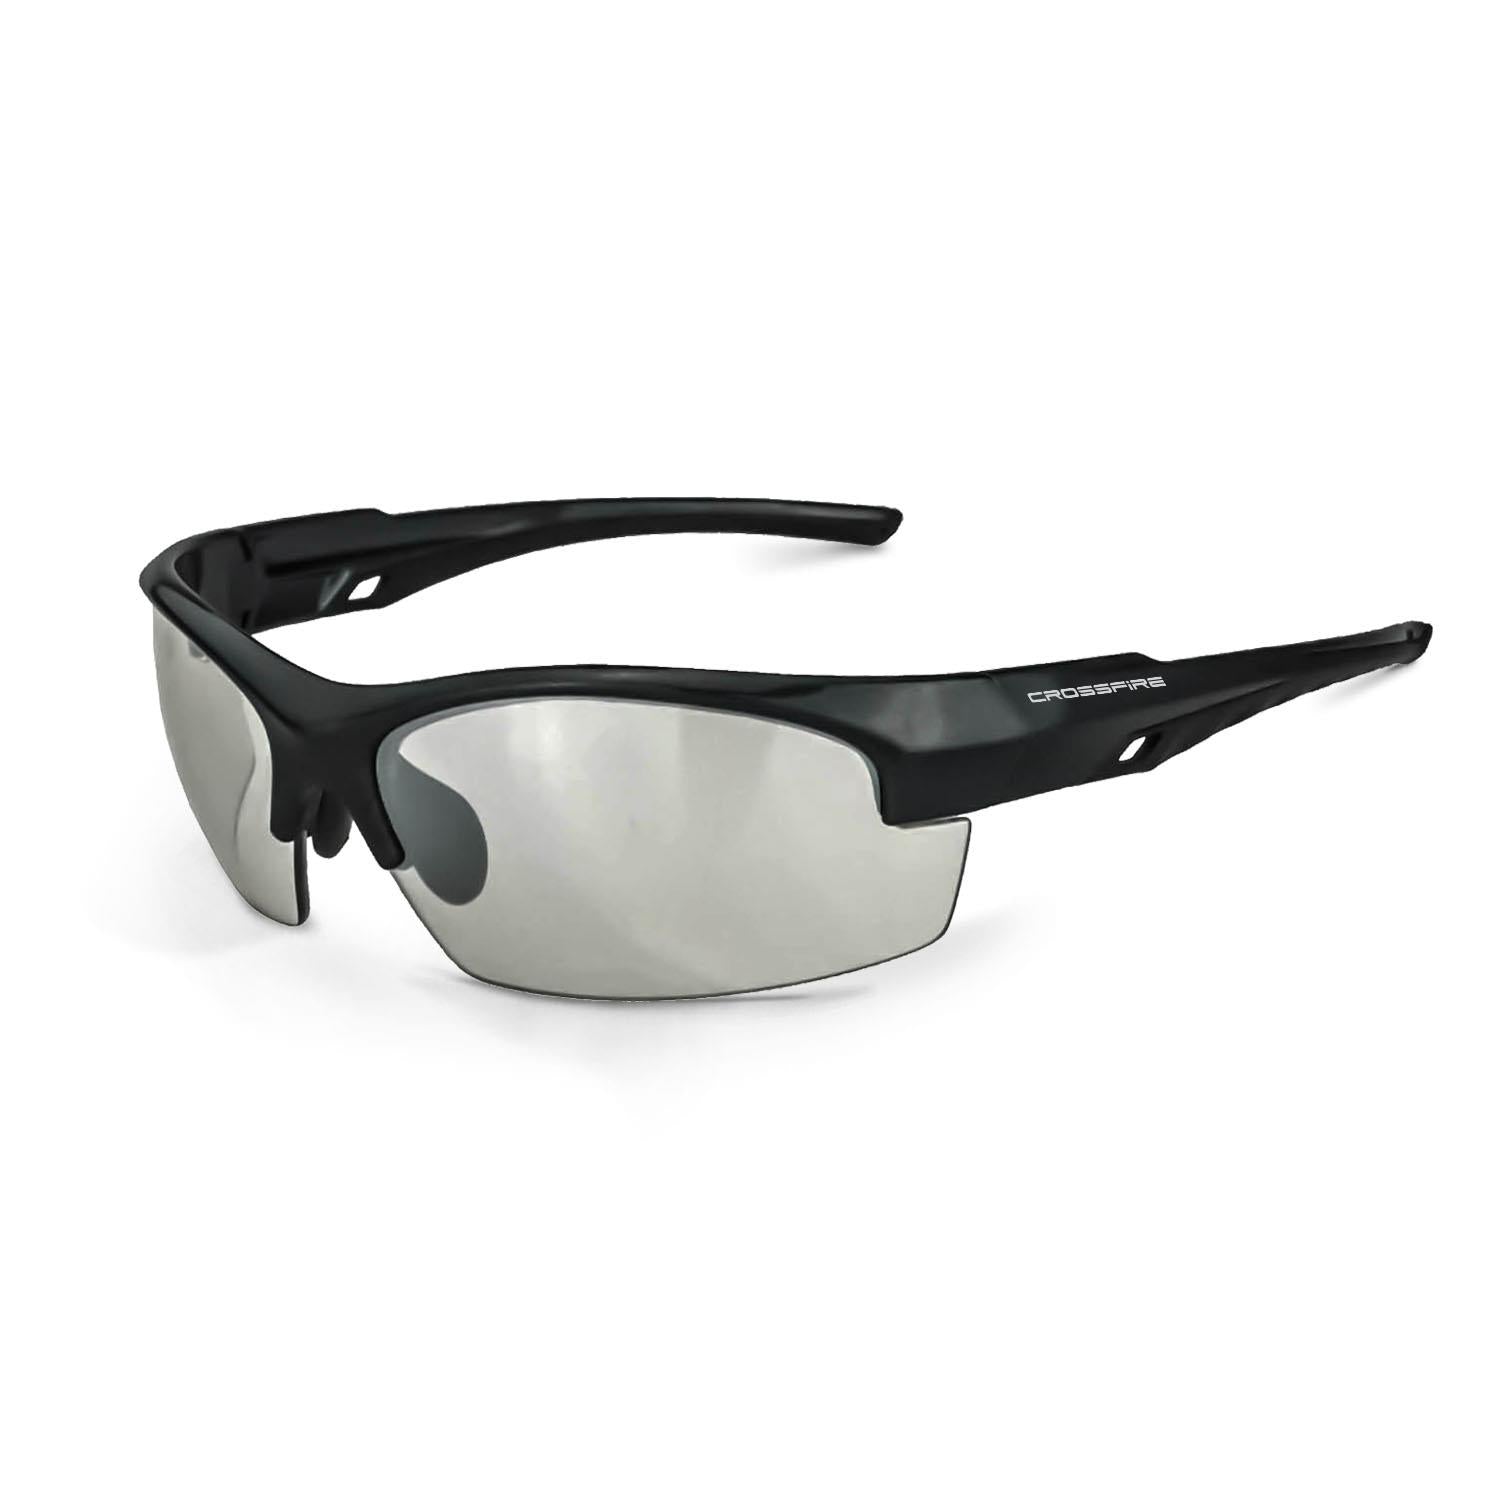 Crossfire Mirrored Safety Glasses